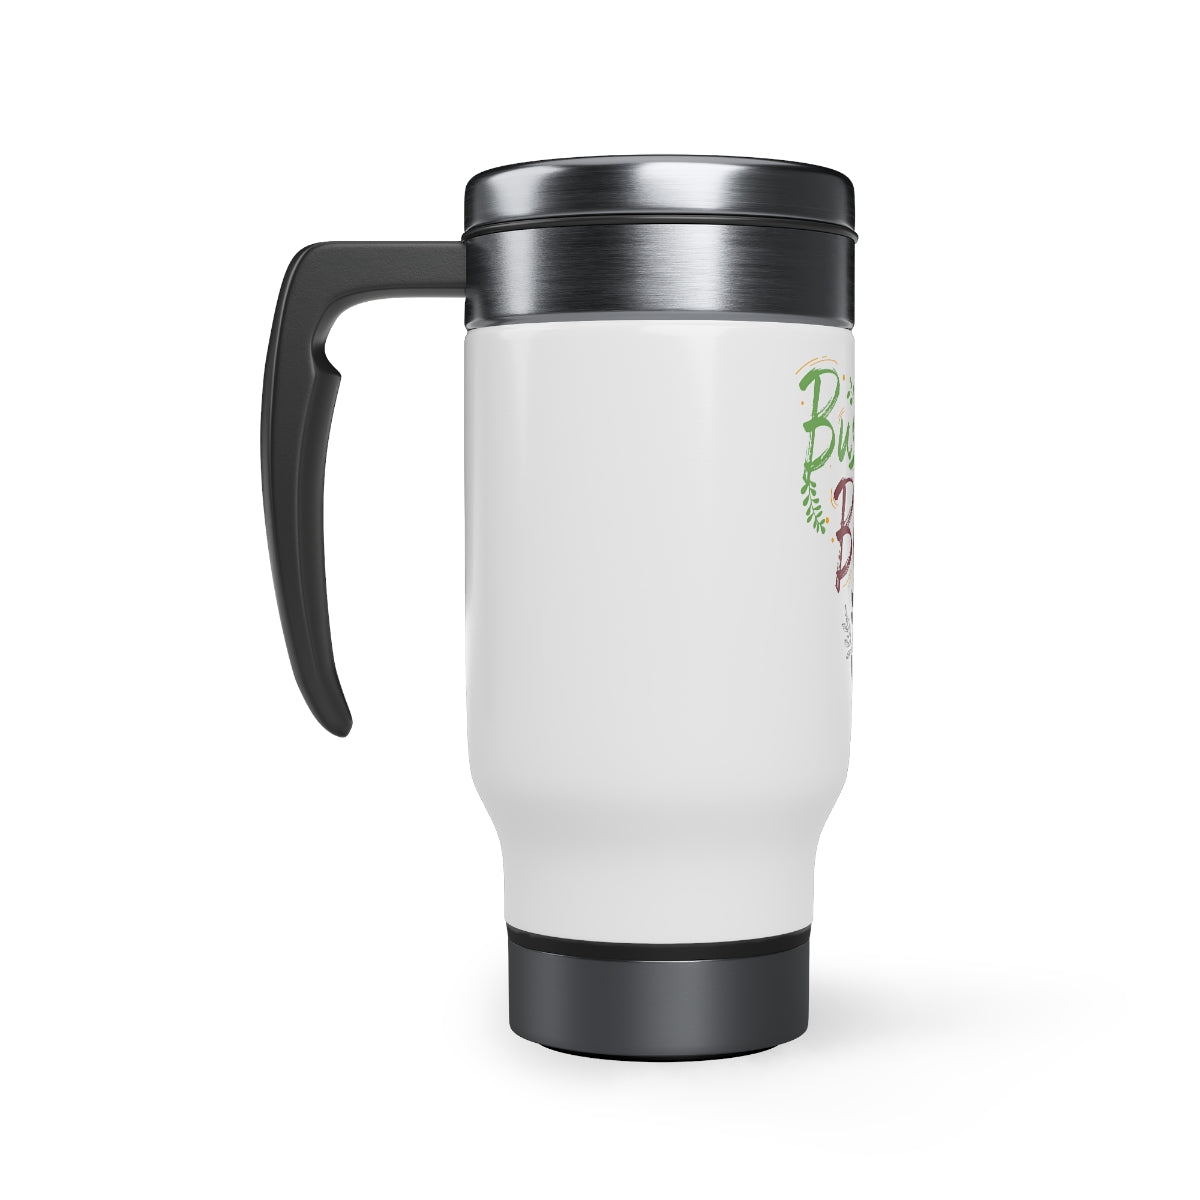 Busy Being Godly Stainless Steel Travel Mug with Handle, 14oz Printify